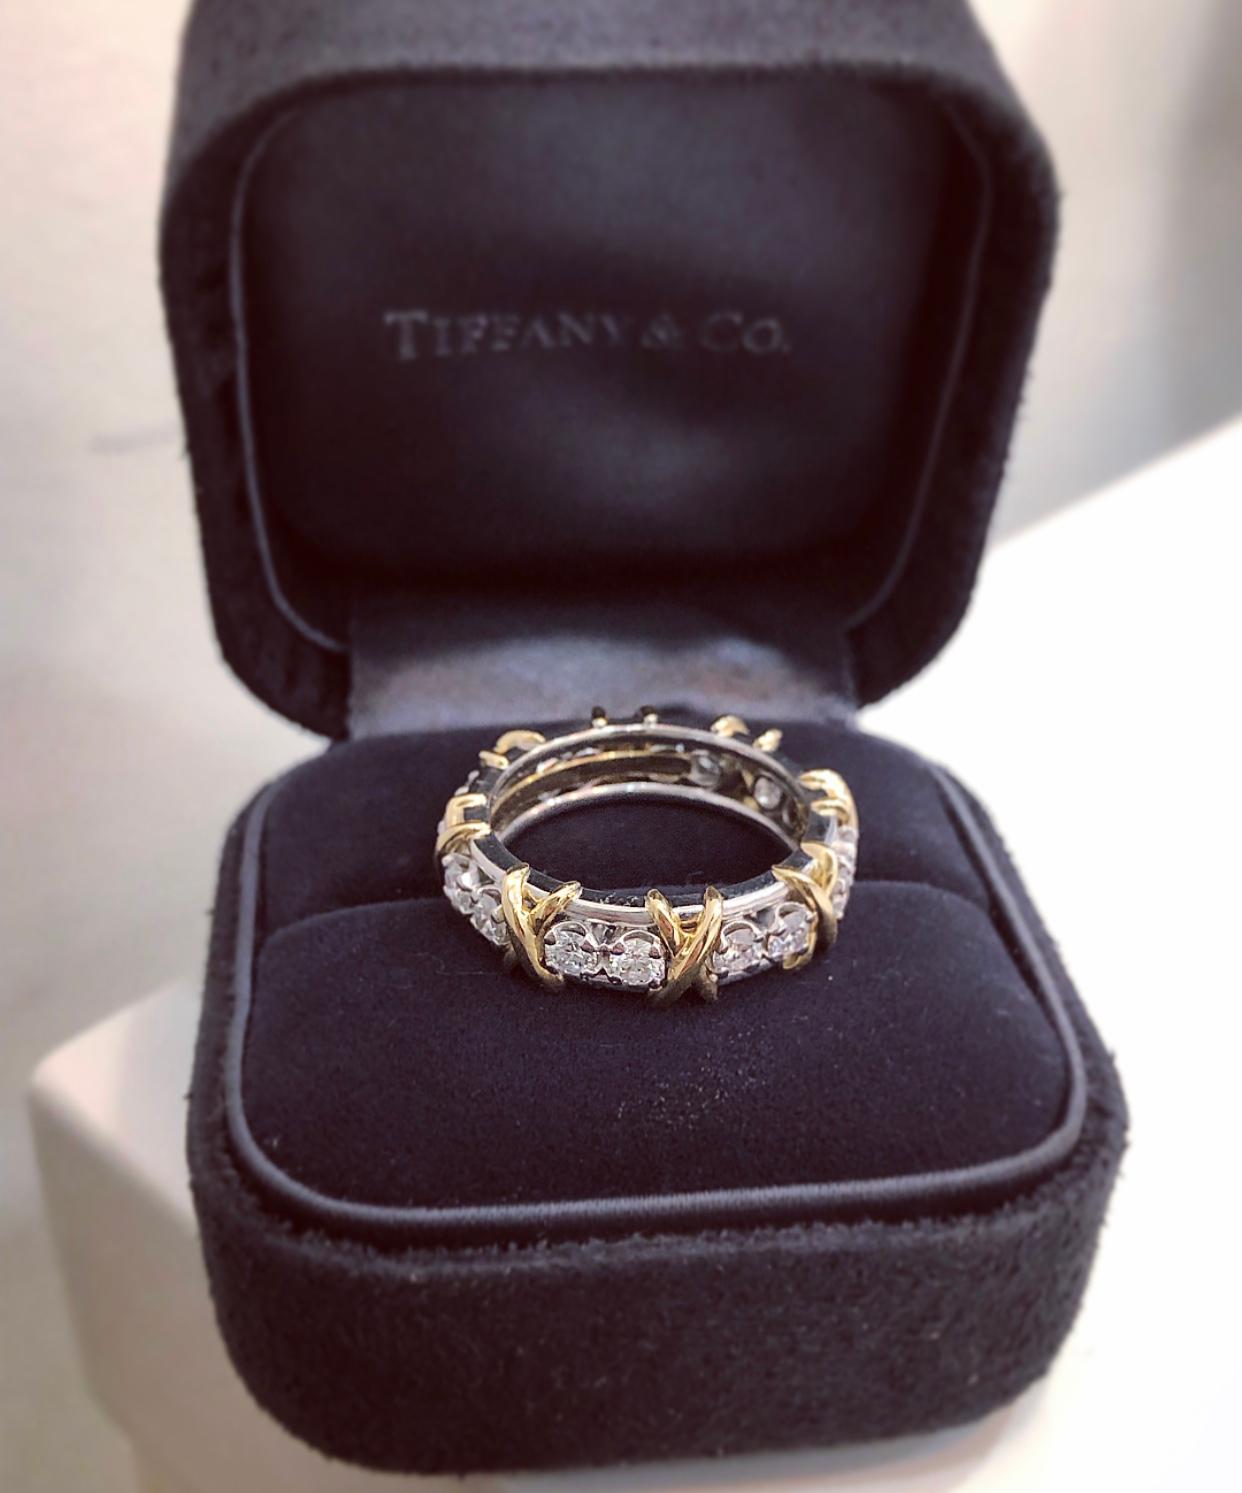 Tiffany & Co. Schlumberger Eternity Ring with Diamonds 4